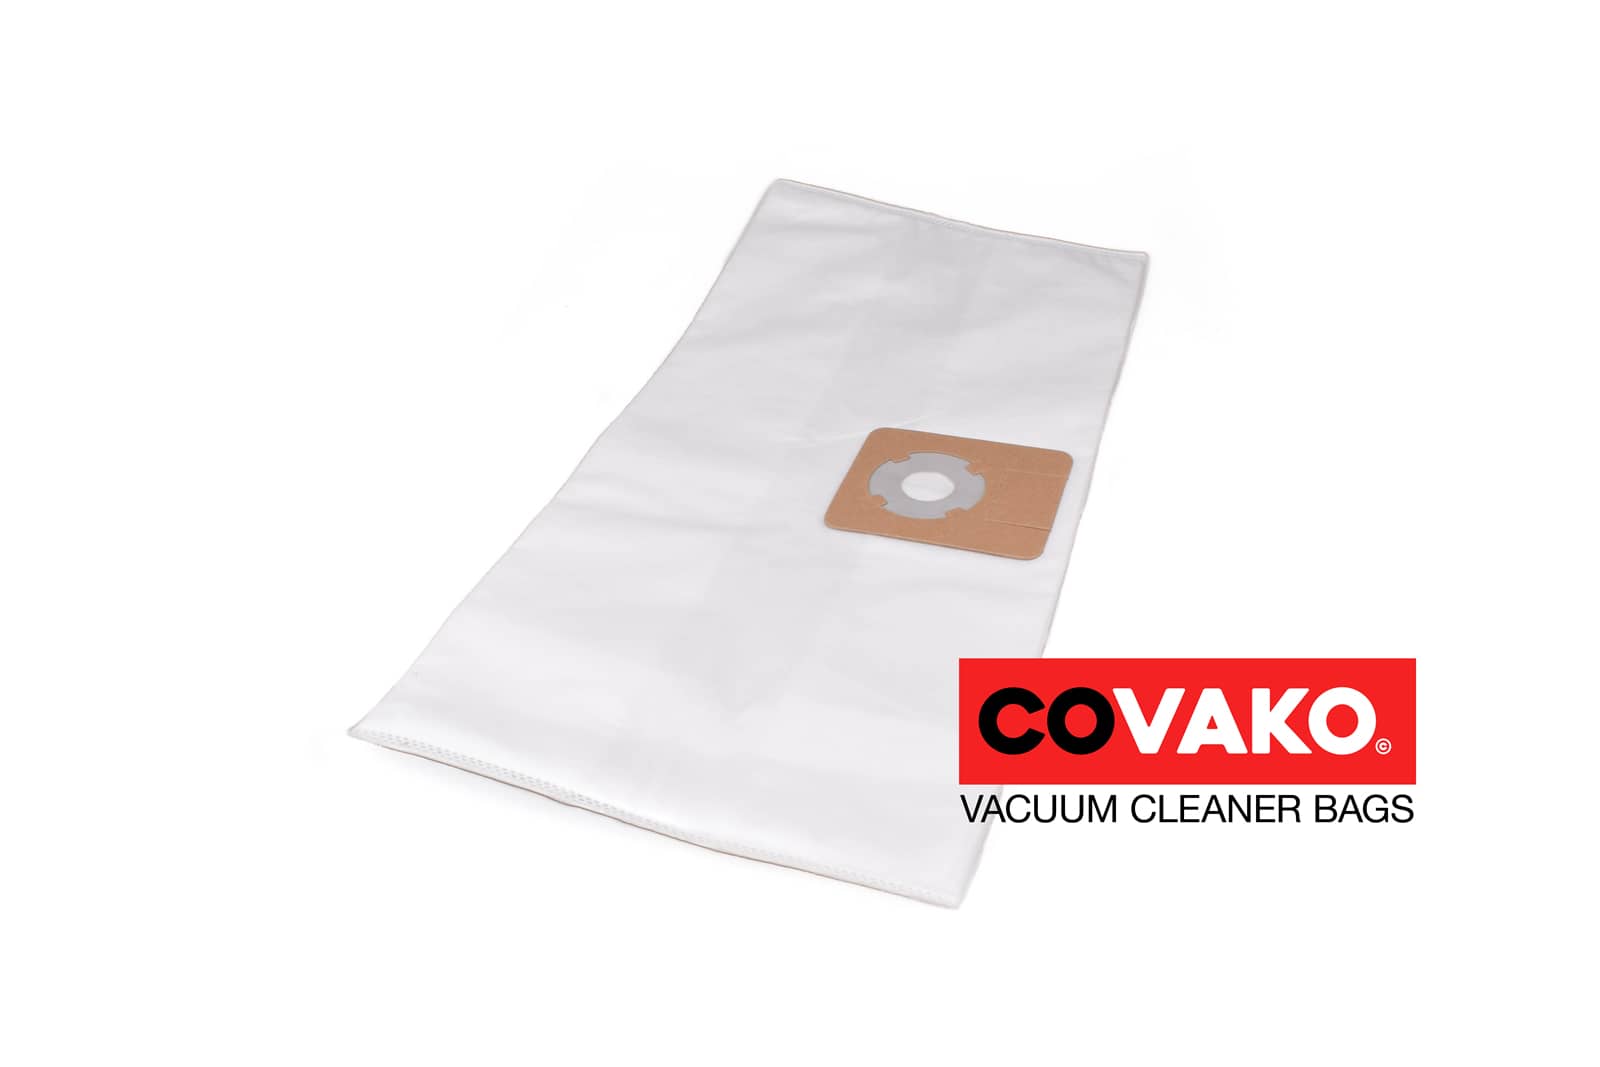 Wetrok Monovac 9 / Synthesis - Wetrok vacuum cleaner bags